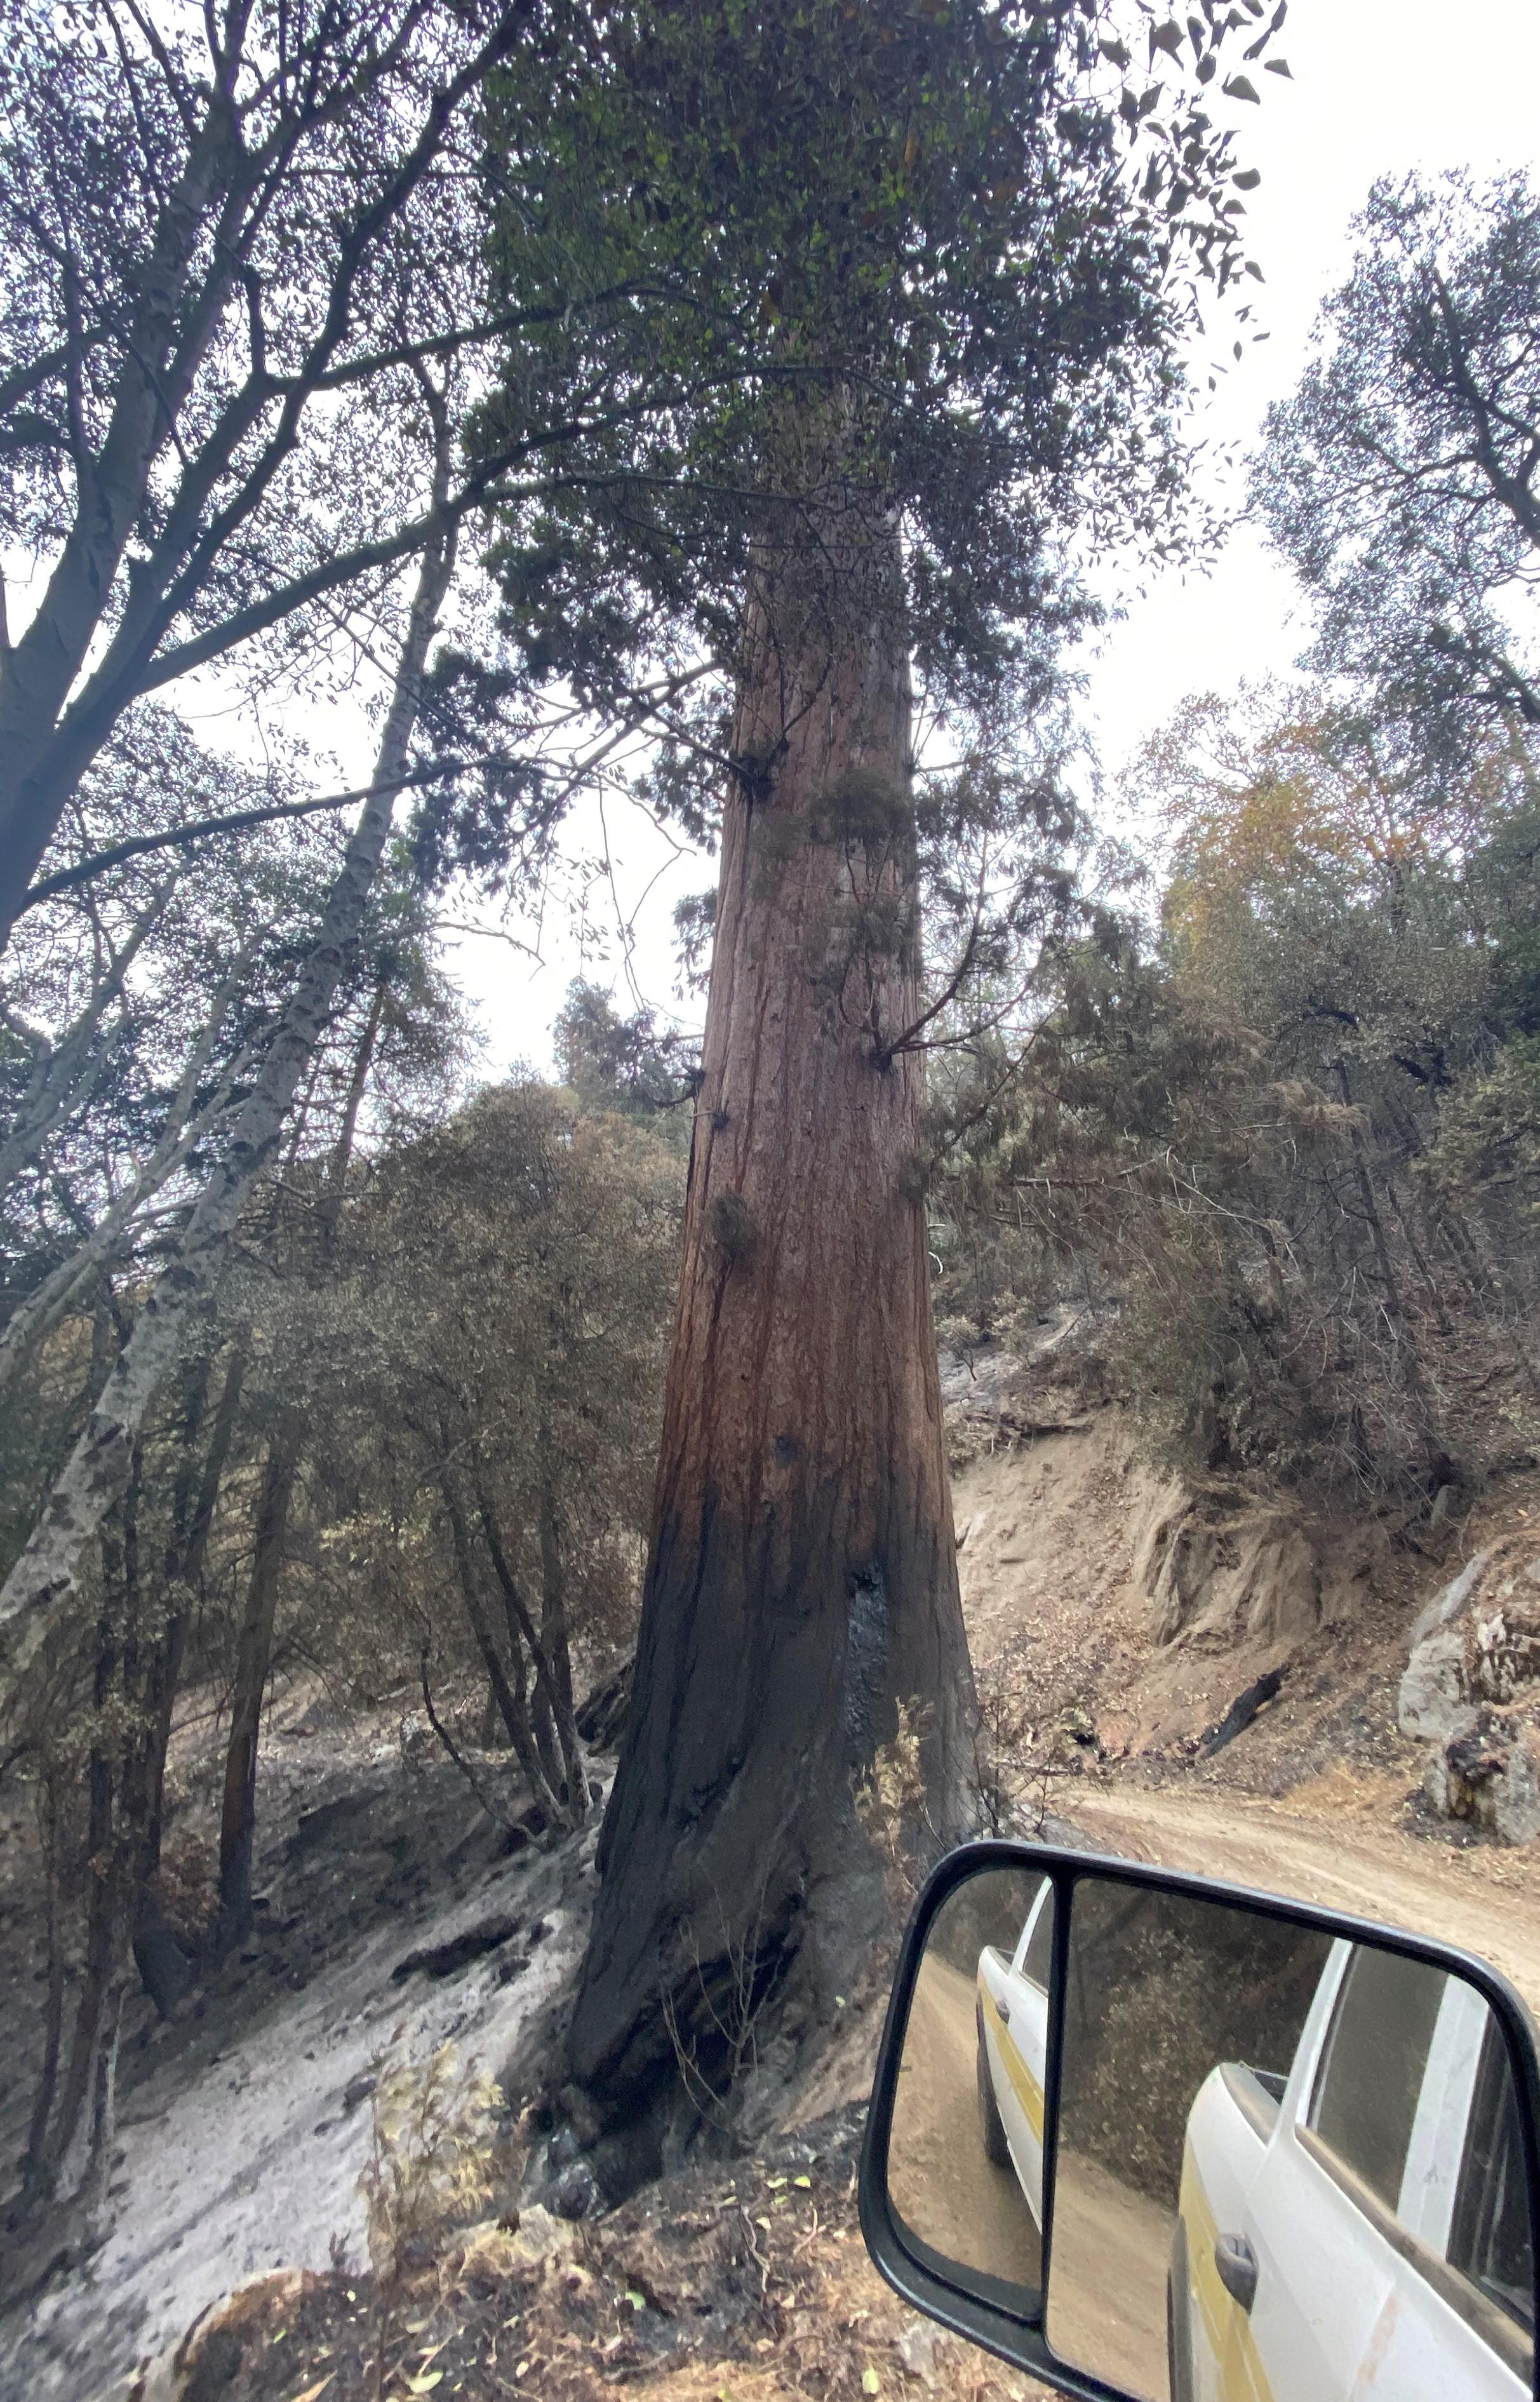 A truck drives along a dirt road next to a large tree that has been scorched around the base